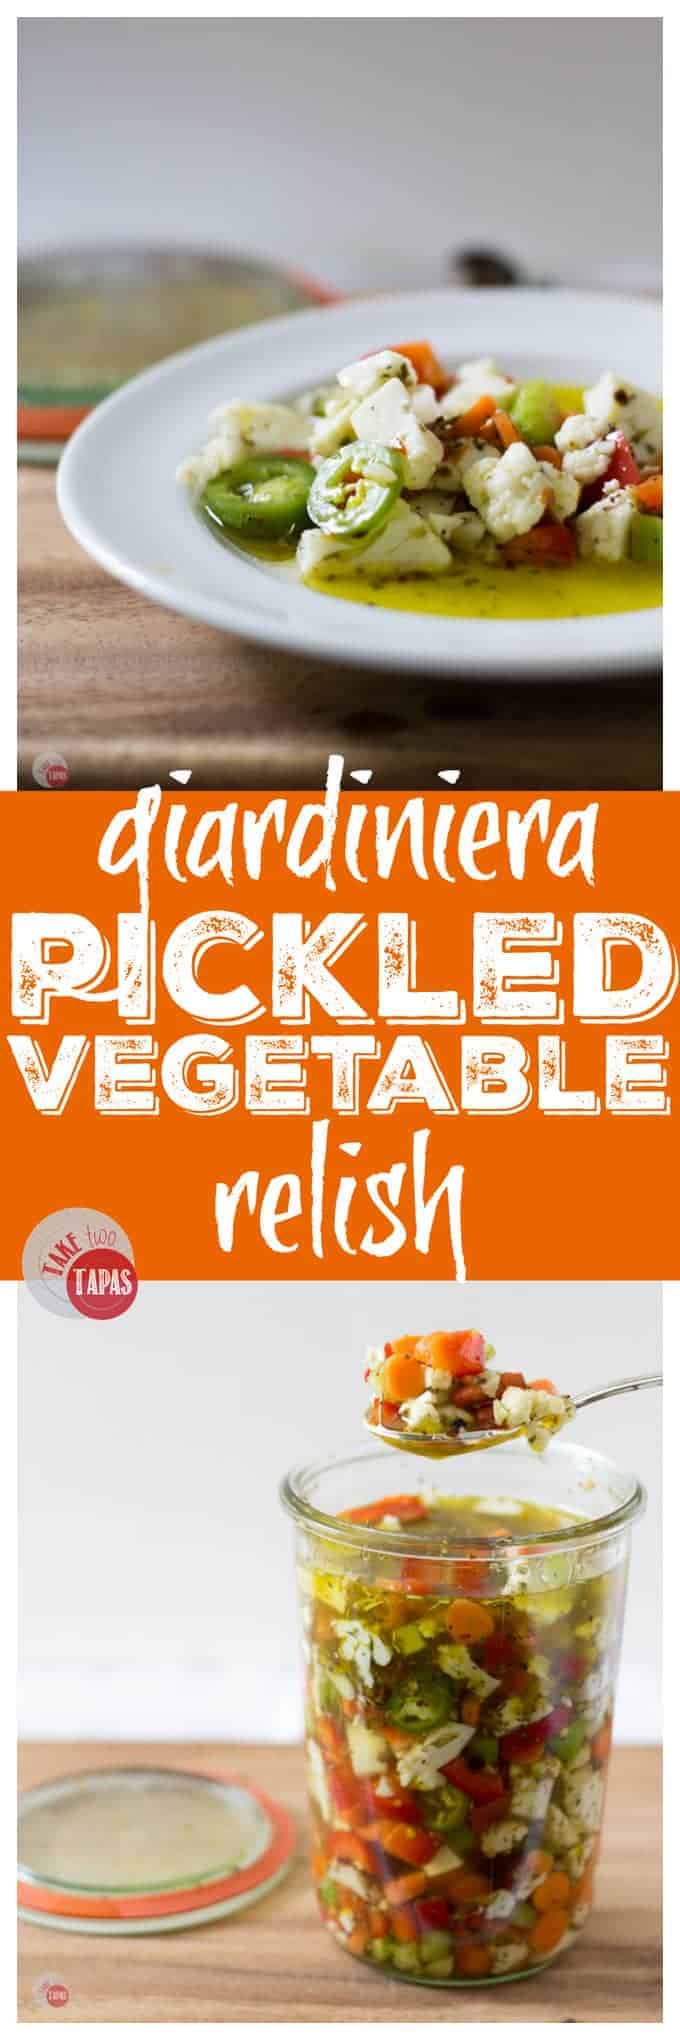 Pinterest collage image with text "Giardiniera Pickled Vegetable Relish"